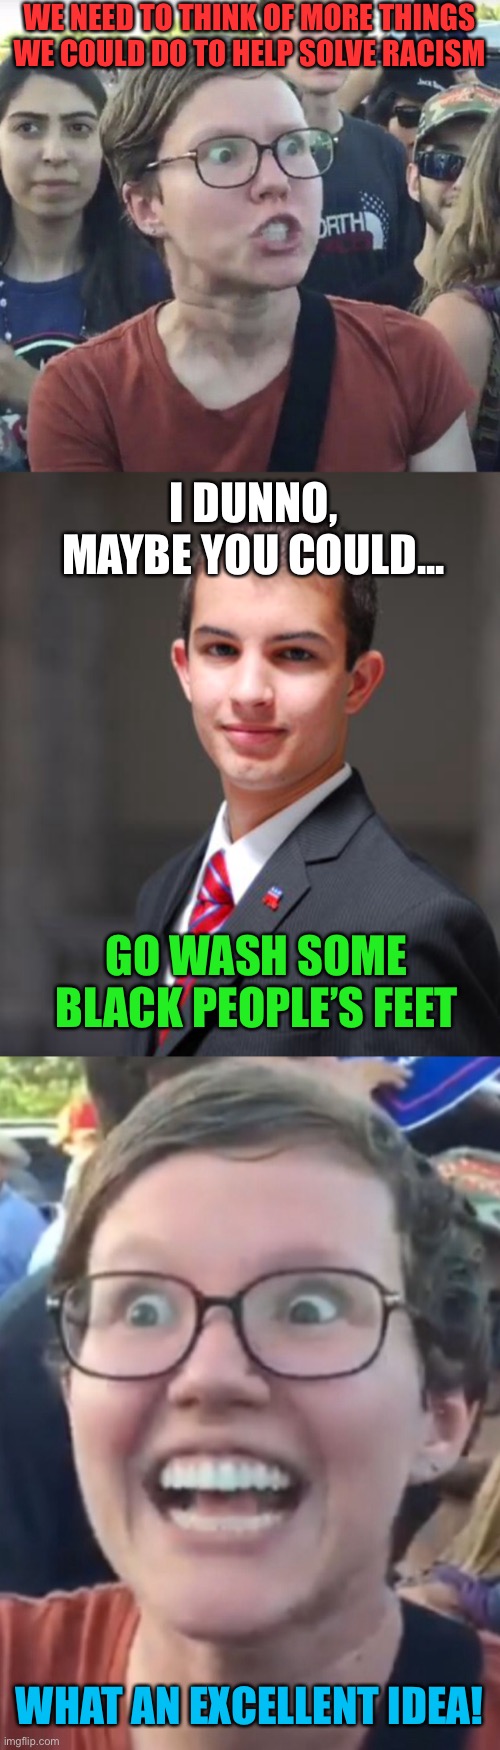 WE NEED TO THINK OF MORE THINGS WE COULD DO TO HELP SOLVE RACISM; I DUNNO, MAYBE YOU COULD... GO WASH SOME BLACK PEOPLE’S FEET; WHAT AN EXCELLENT IDEA! | image tagged in college conservative,leftist,black people,feet,racism,wash | made w/ Imgflip meme maker